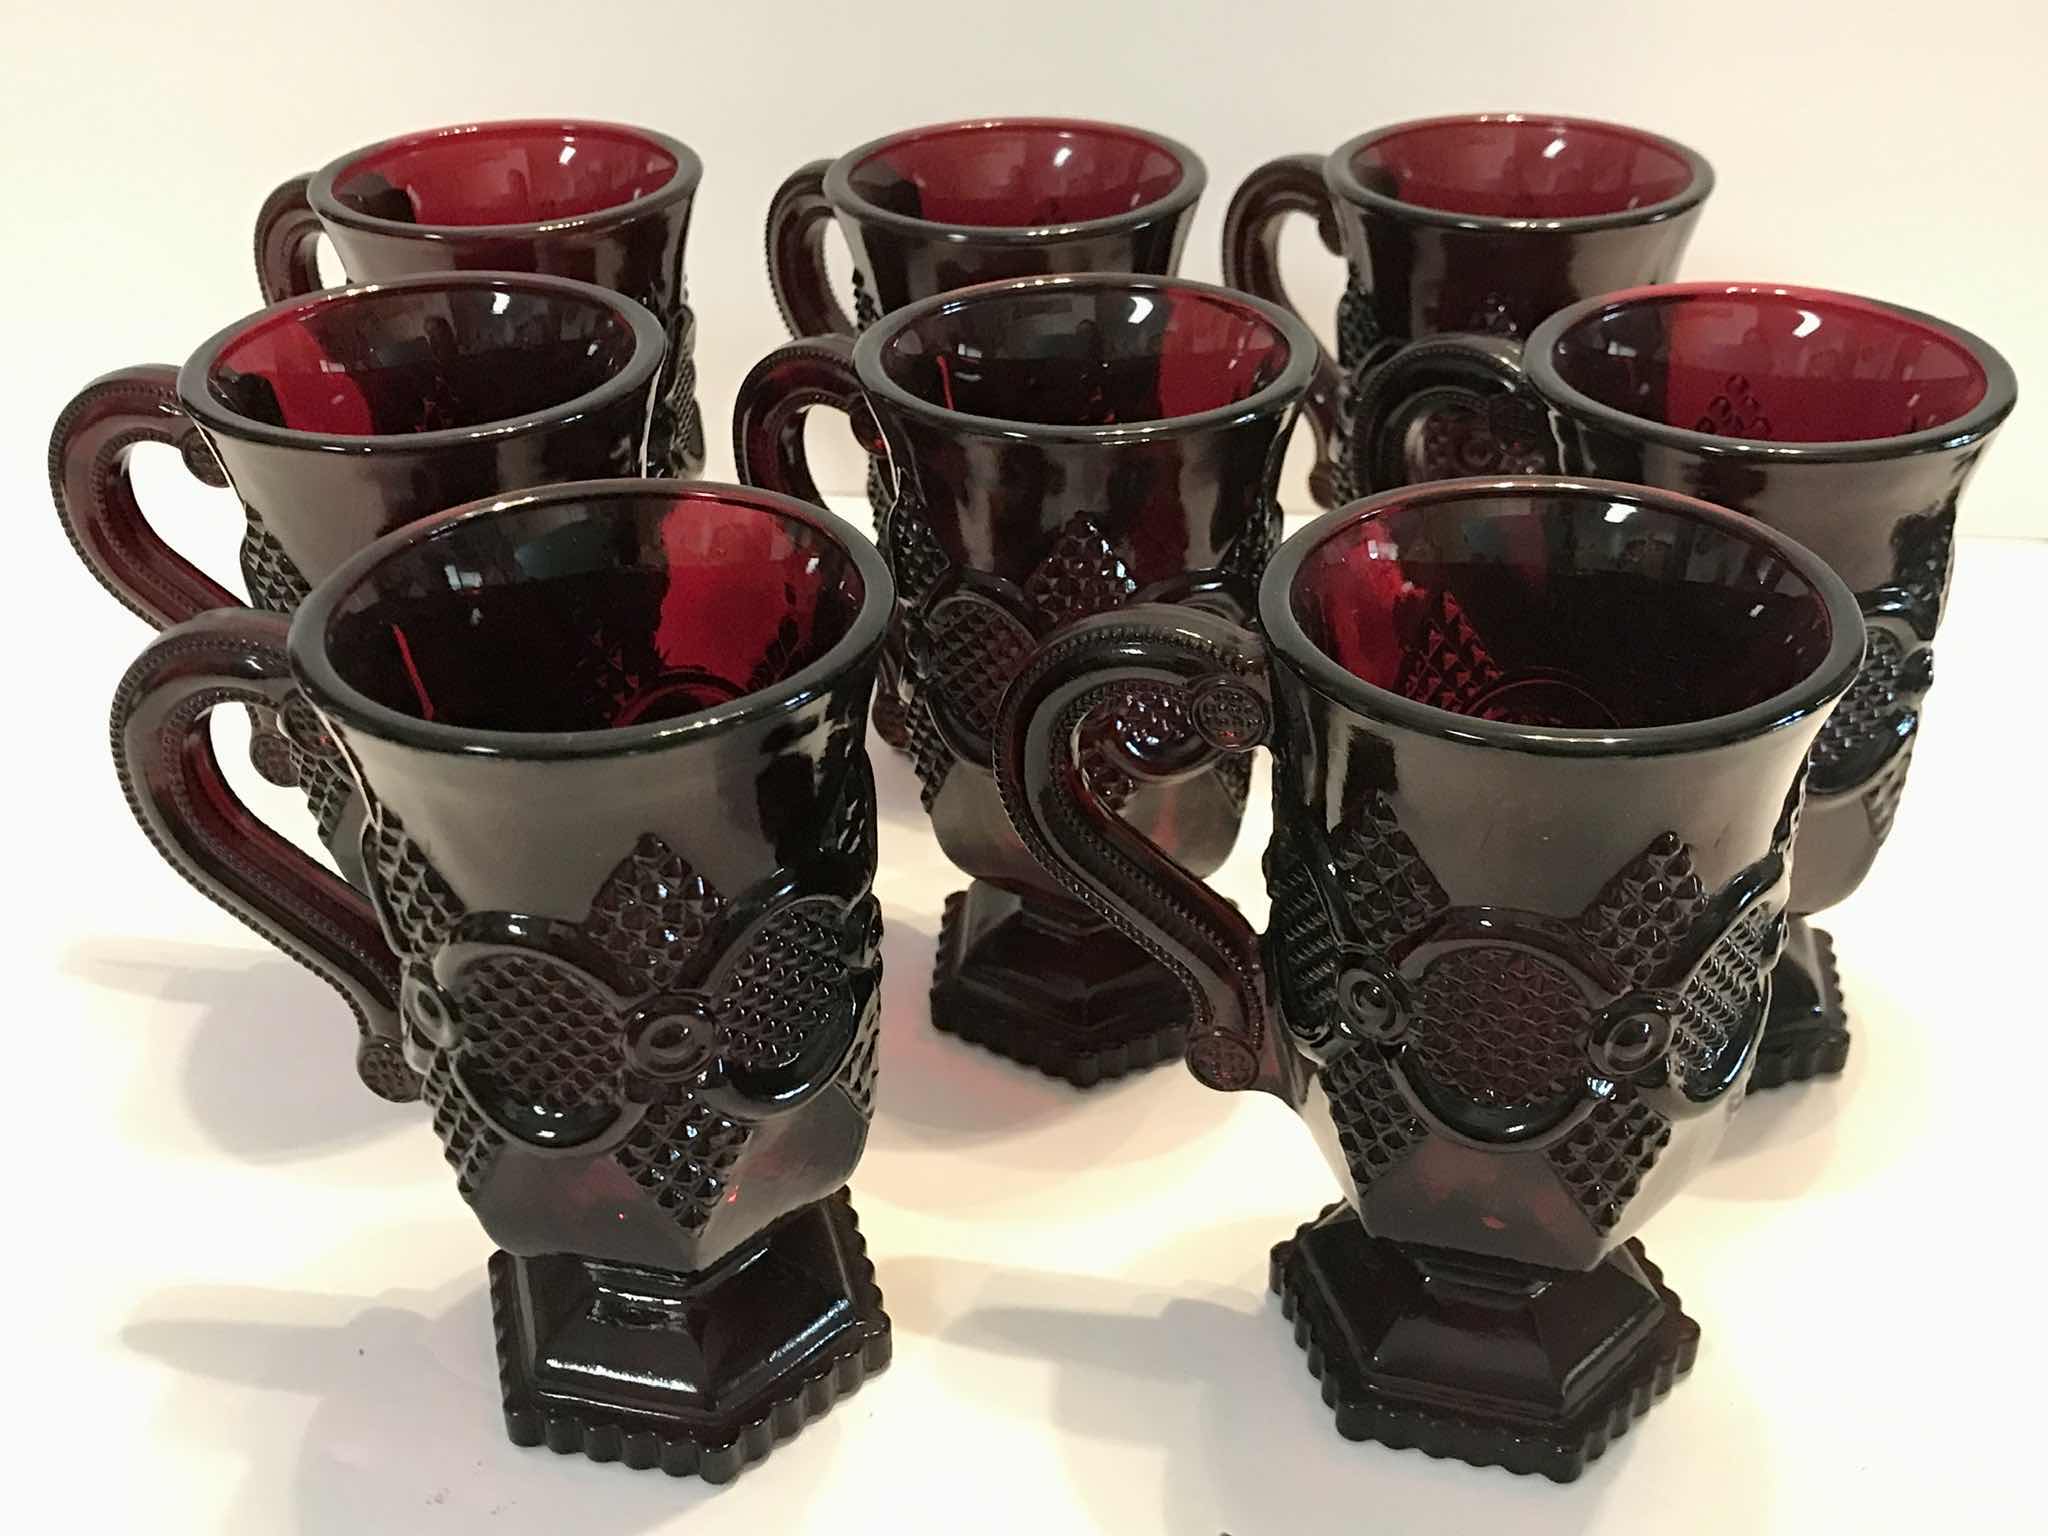 Photo 2 of VINTAGE CAPE COD ROYAL RUBY RED AVON GLASS HANDLE PEDESTAL MUGS SET OF 8 - MORE OF THIS COLLECTION IN AUCTION